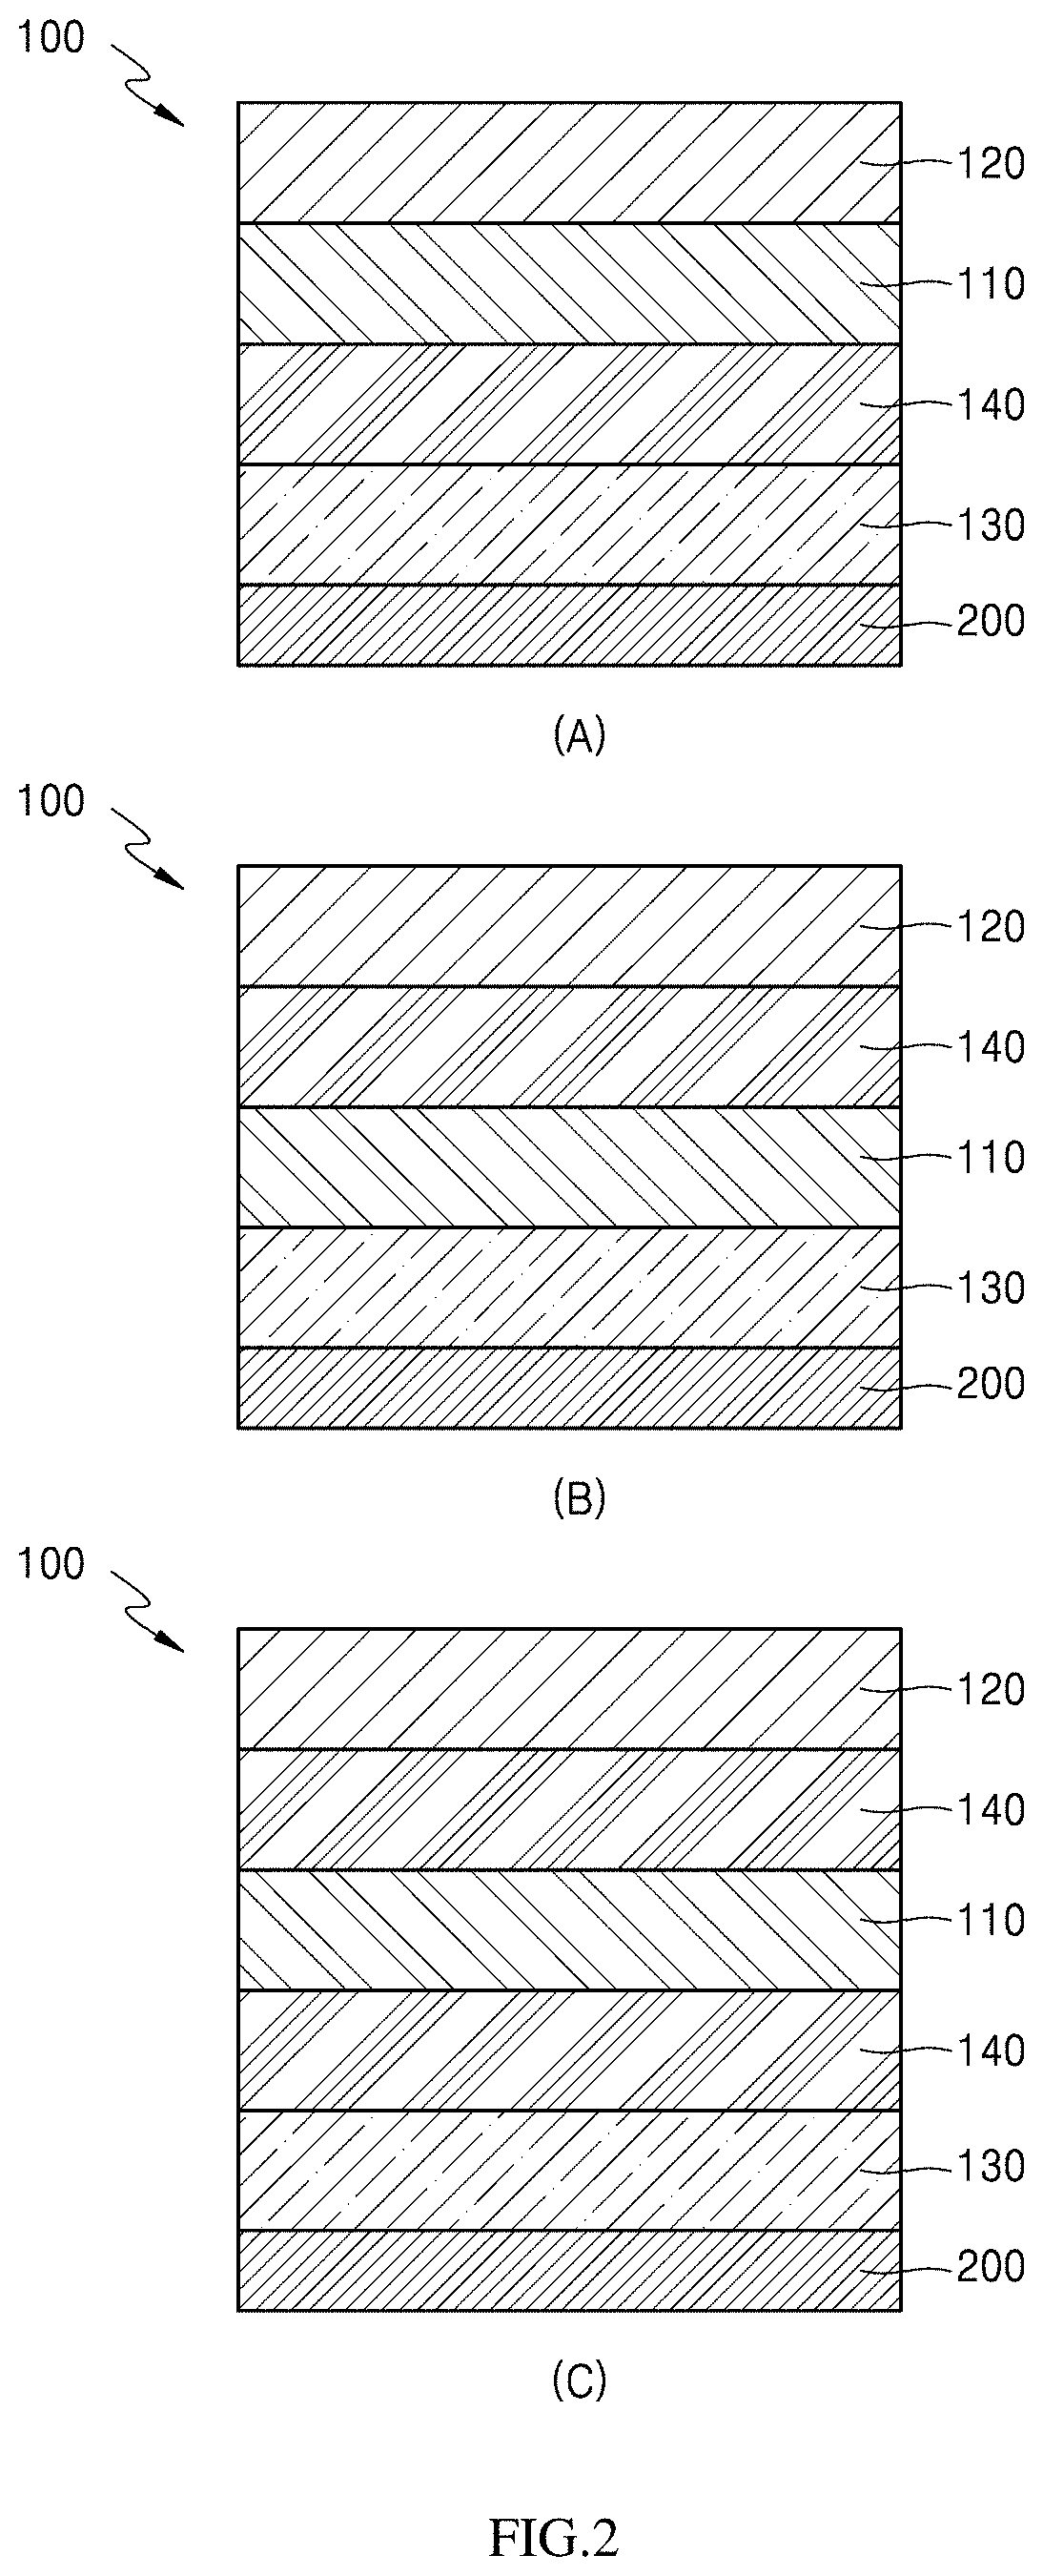 Protective film for windshield of vehicle